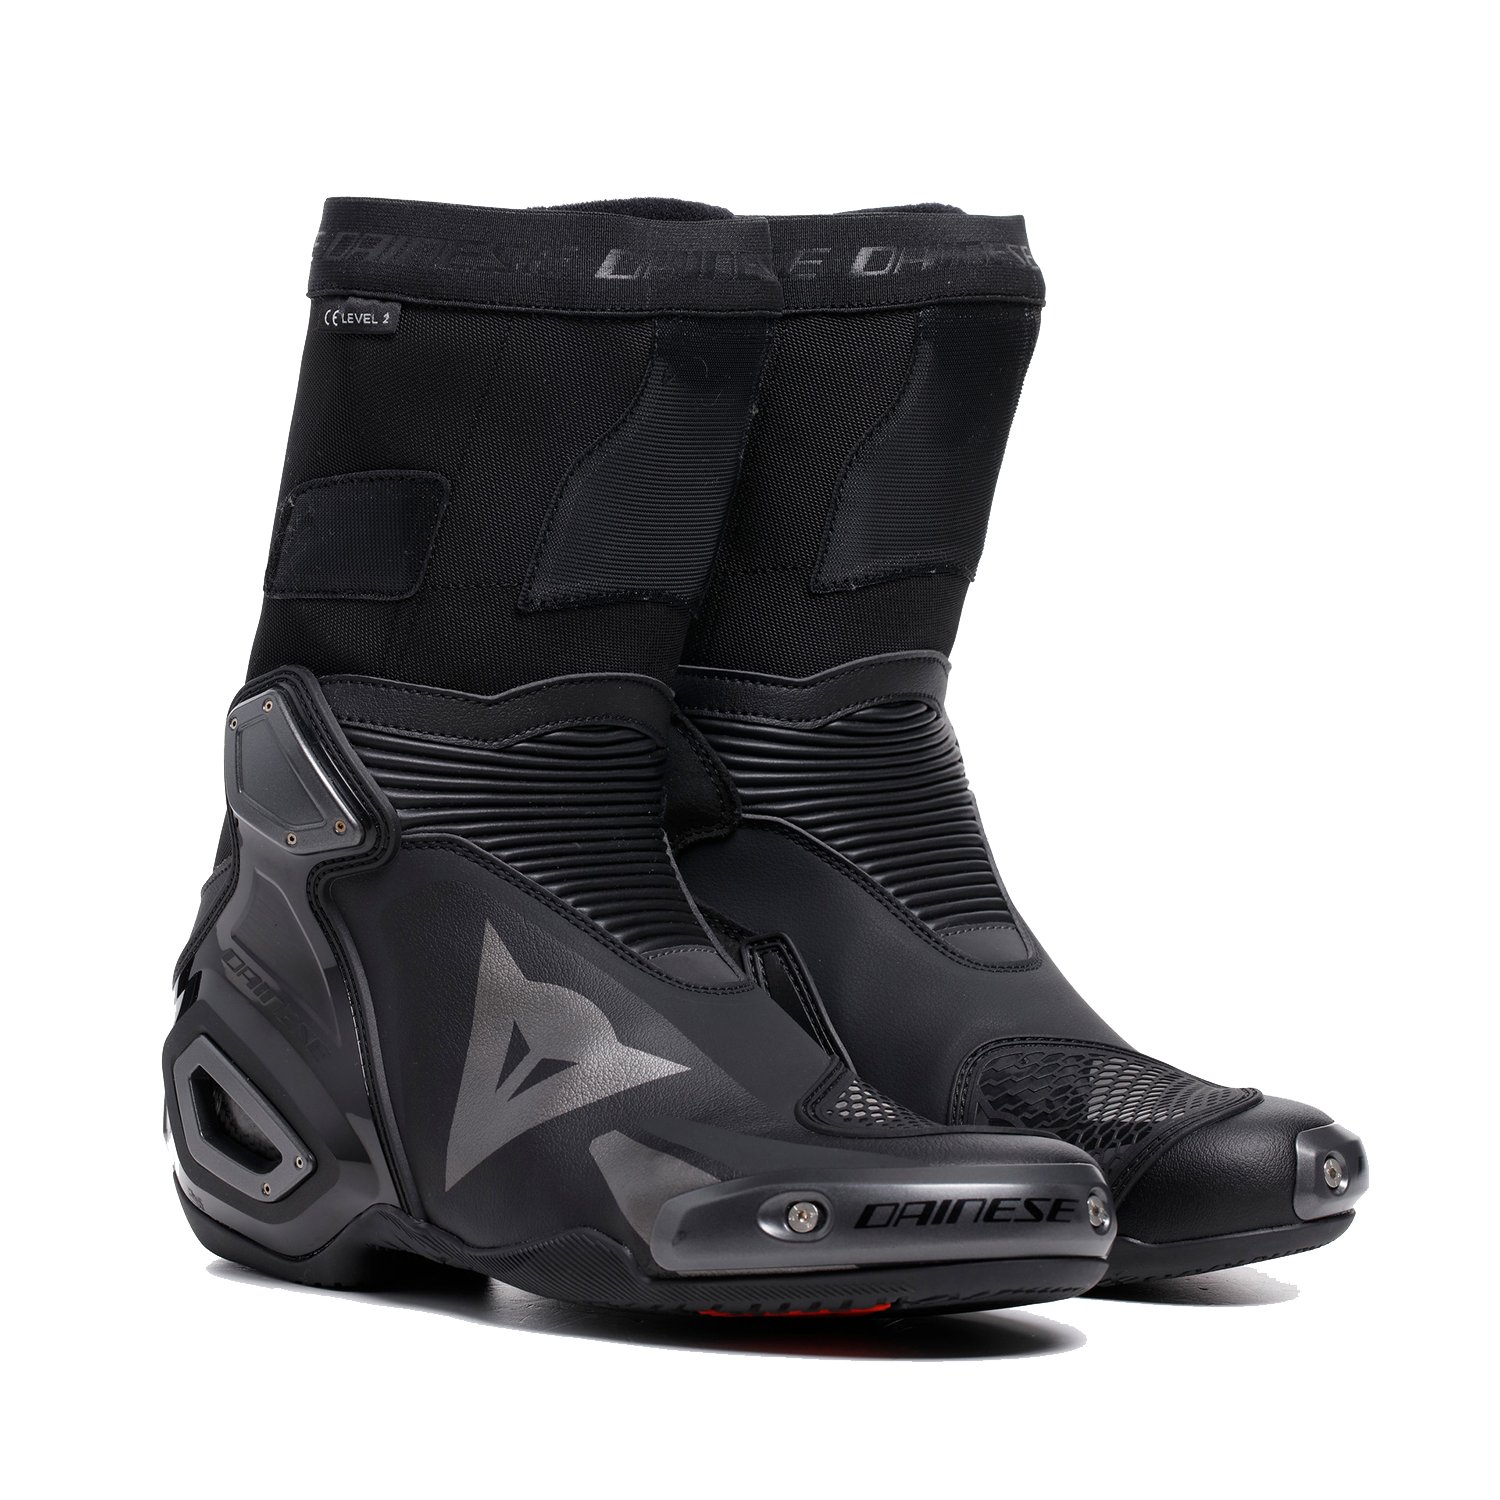 Image of Dainese Axial 2 Boots Black Size 41 EN